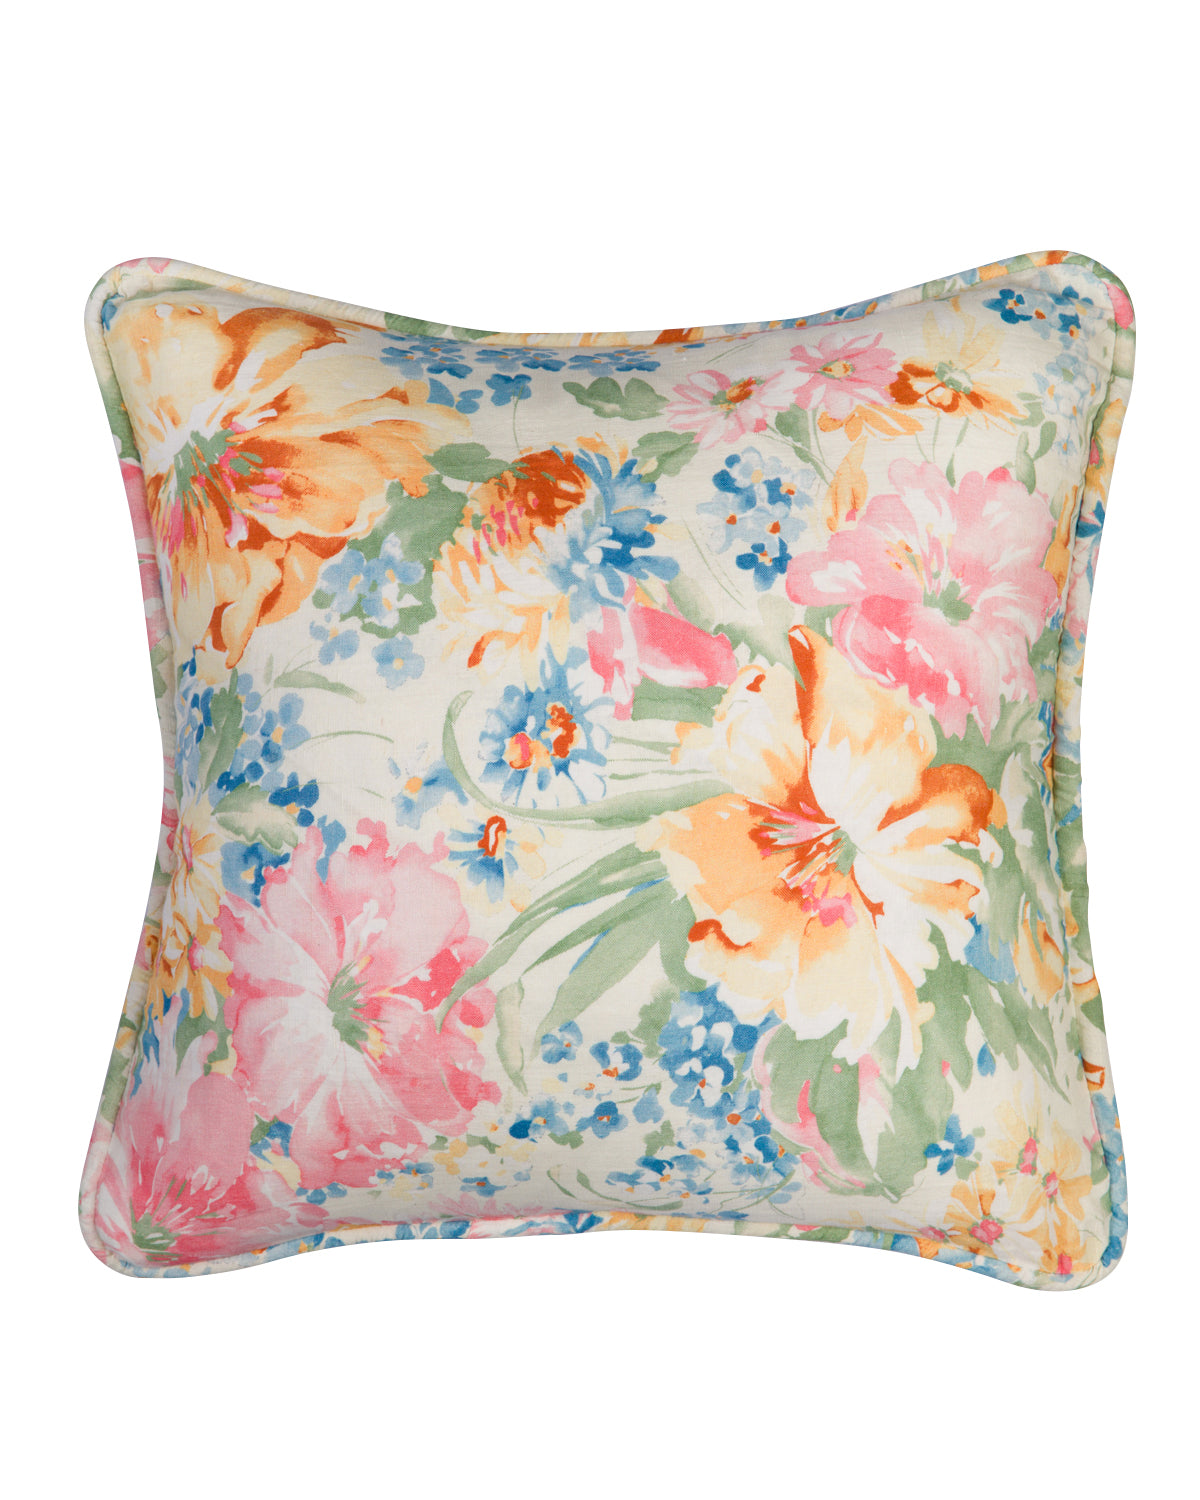 Cushion Cover Linen 60x60 cm Pink Floral Puter